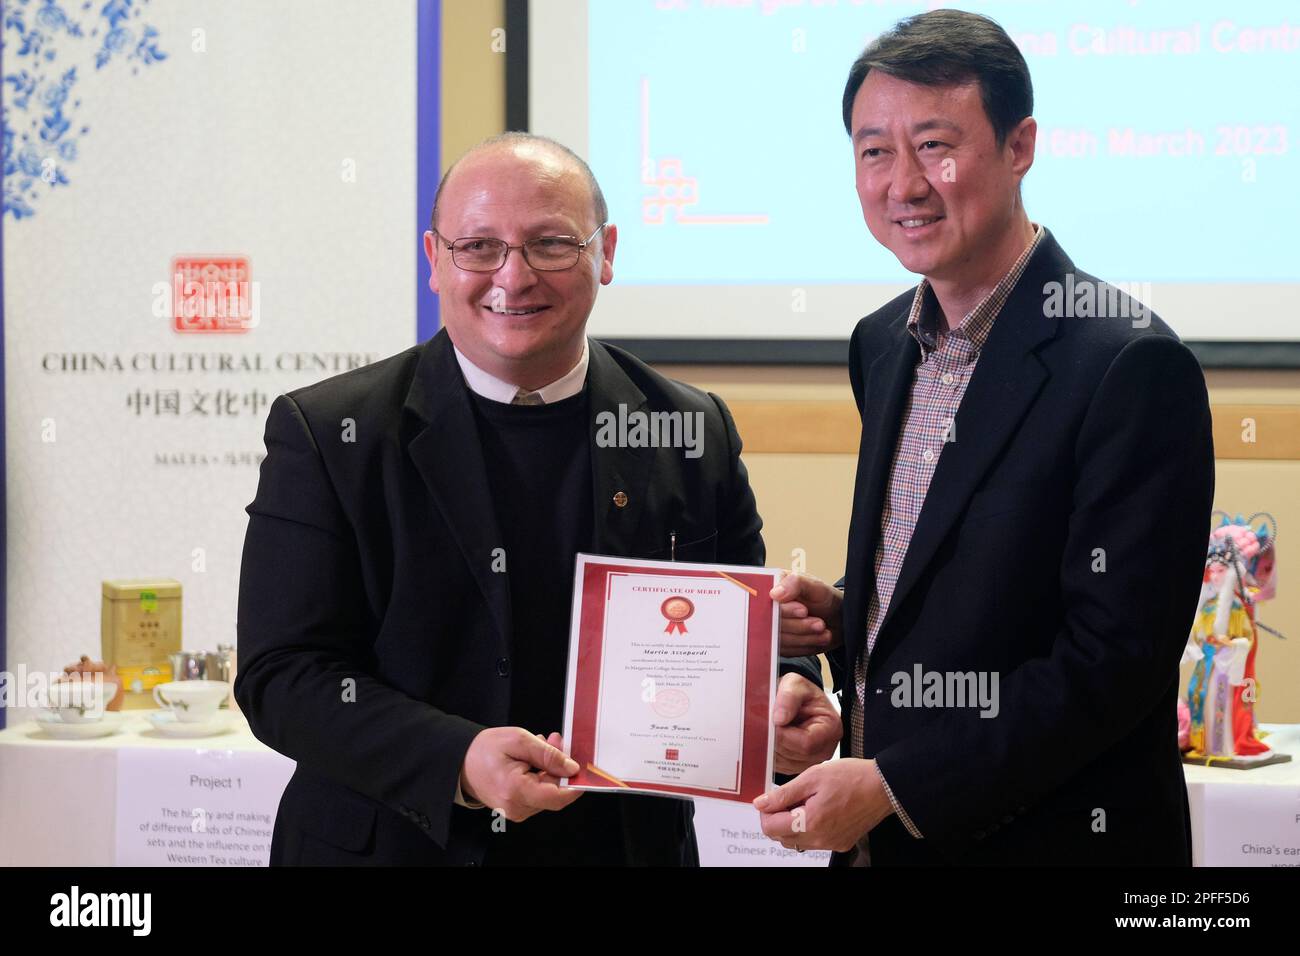 (230317) -- VALLETTA, March 17, 2023 (Xinhua) -- Chinese Ambassador to Malta Yu Dunhai presents a certificate to Martin Azzopardi, founder of 'China Corner' and science teacher at St. Margaret College Secondary School, in Valletta, Malta, March 16, 2023. Students of 'China Corner' at St. Margaret College Secondary School presented their six China-related research projects on Thursday here at the China Cultural Center. The six projects included the history and making of different kinds of Chinese tea sets and the influence on the Western tea culture, the history and making of Chinese silk d Stock Photo